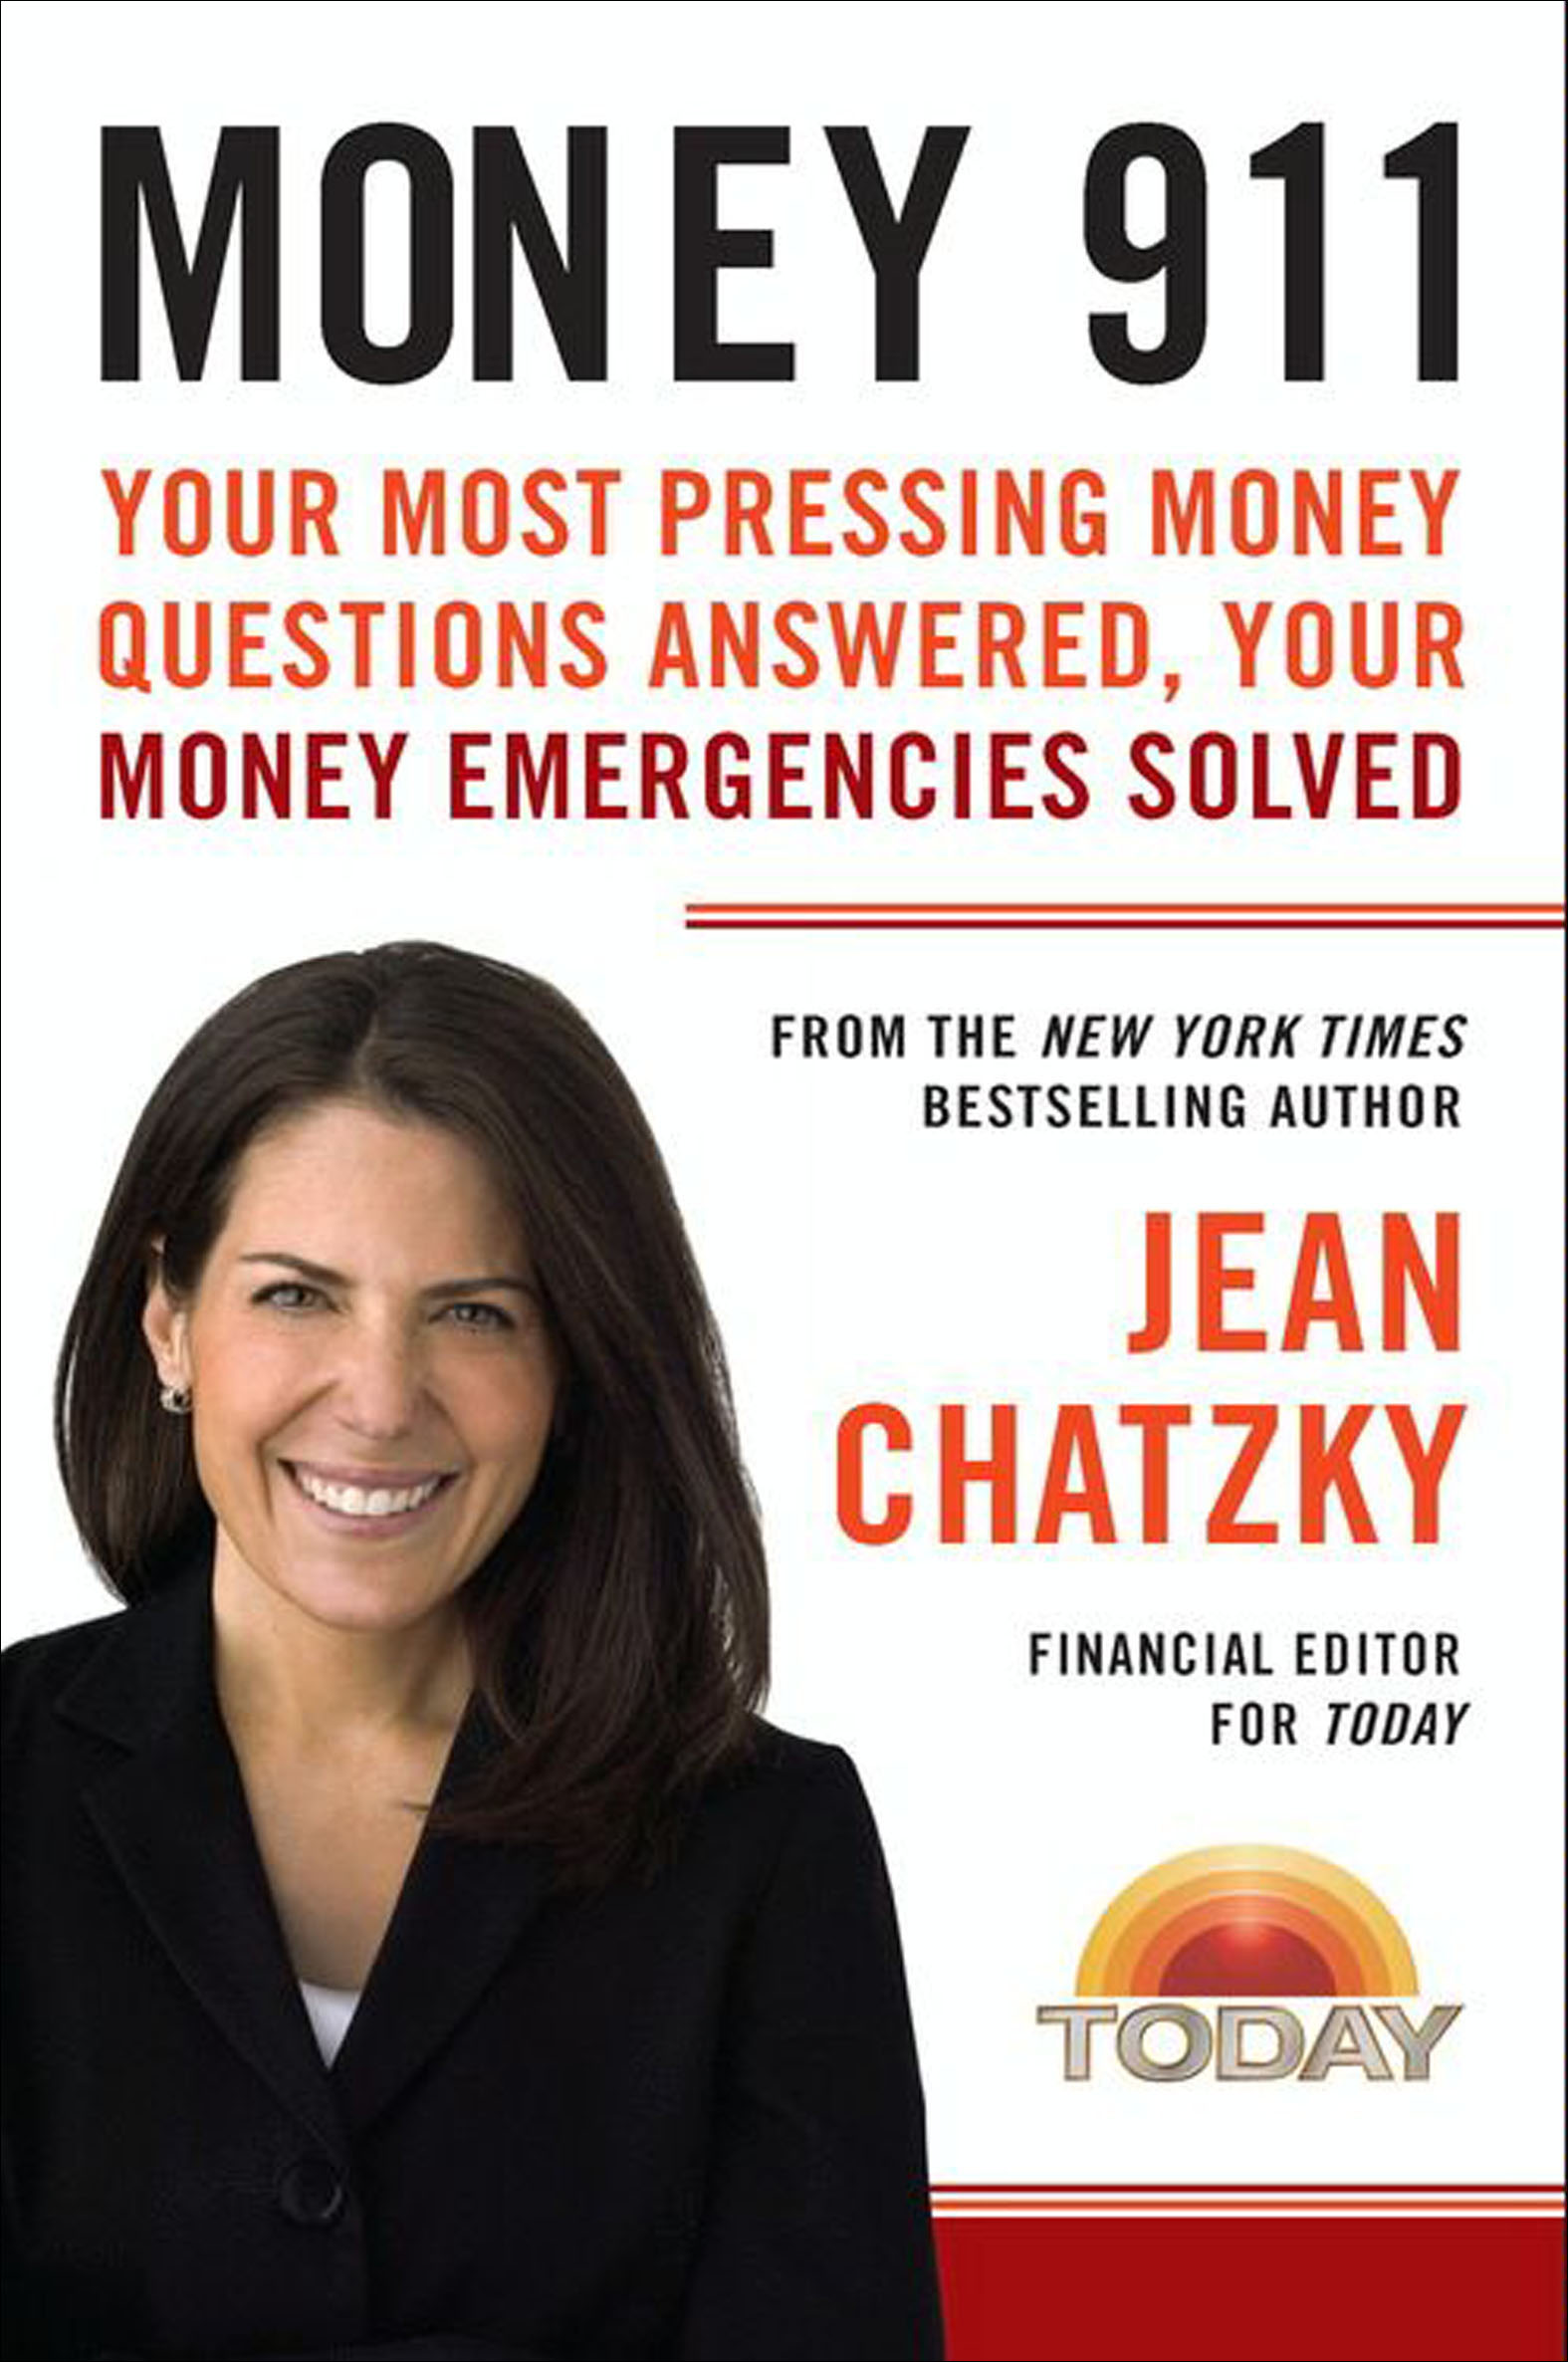 Money 911 your most pressing money questions answered, your money emergencies solved cover image